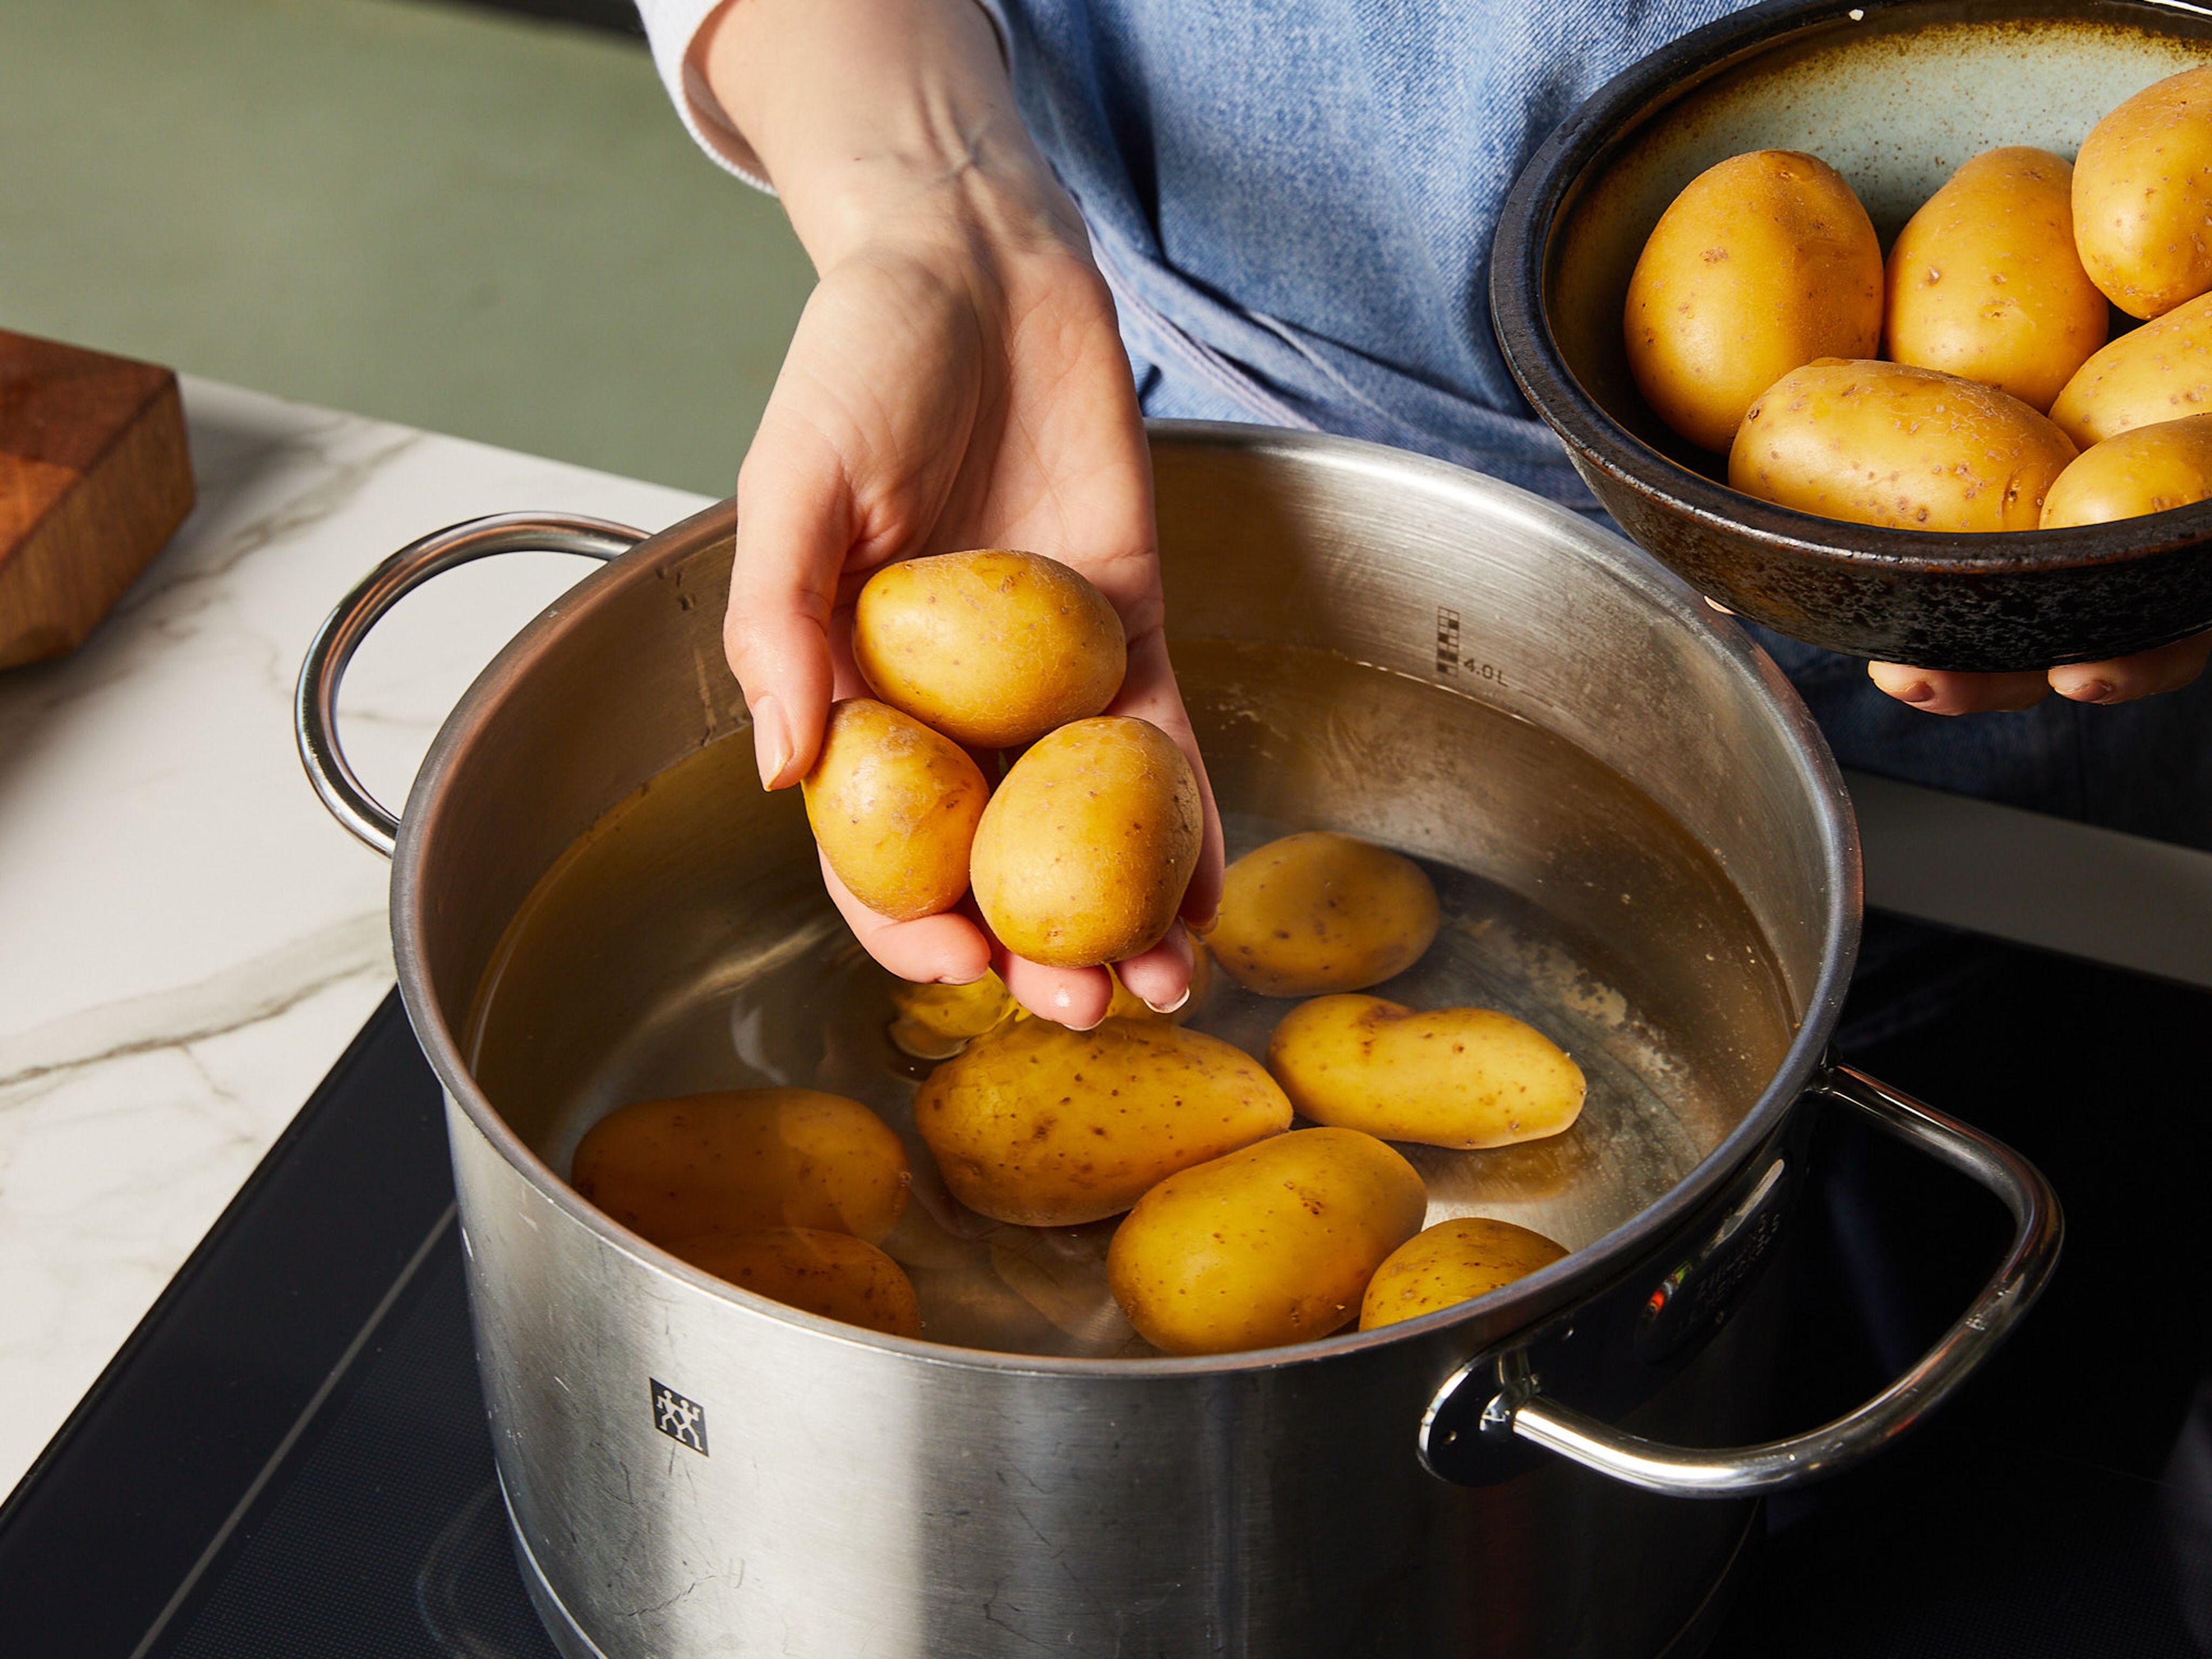 Preheat the oven to 200°C/392°F top/bottom heat. Place the potatoes in a large pot of salted water and bring to a boil. Then reduce the heat slightly and simmer, half-covered with a lid, for approx. 12–15 min. While the potatoes are cooking, cut the sugar snap peas diagonally into strips and finely dice the shallot. Drain the potatoes when you can easily pierce them with a fork.